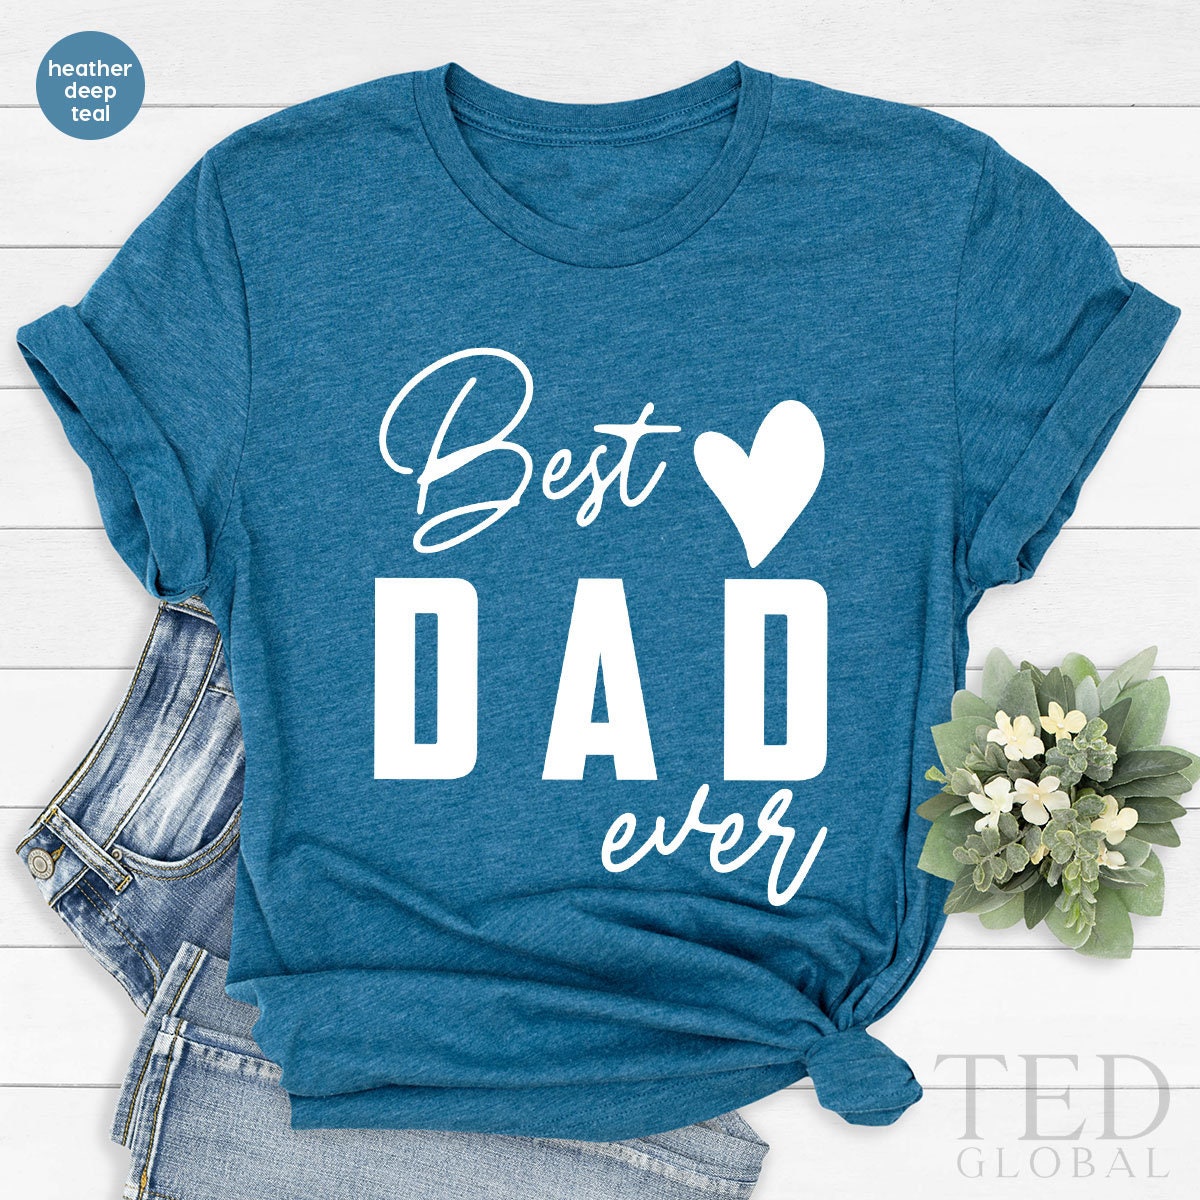 Best Dad Ever Shirt, Grandpa Shirt, Best Dad Shirt, Fathers Day Gifts, Daddy T Shirt, Gift For Dad, Dad Shirt, New Dad Shirt - Fastdeliverytees.com